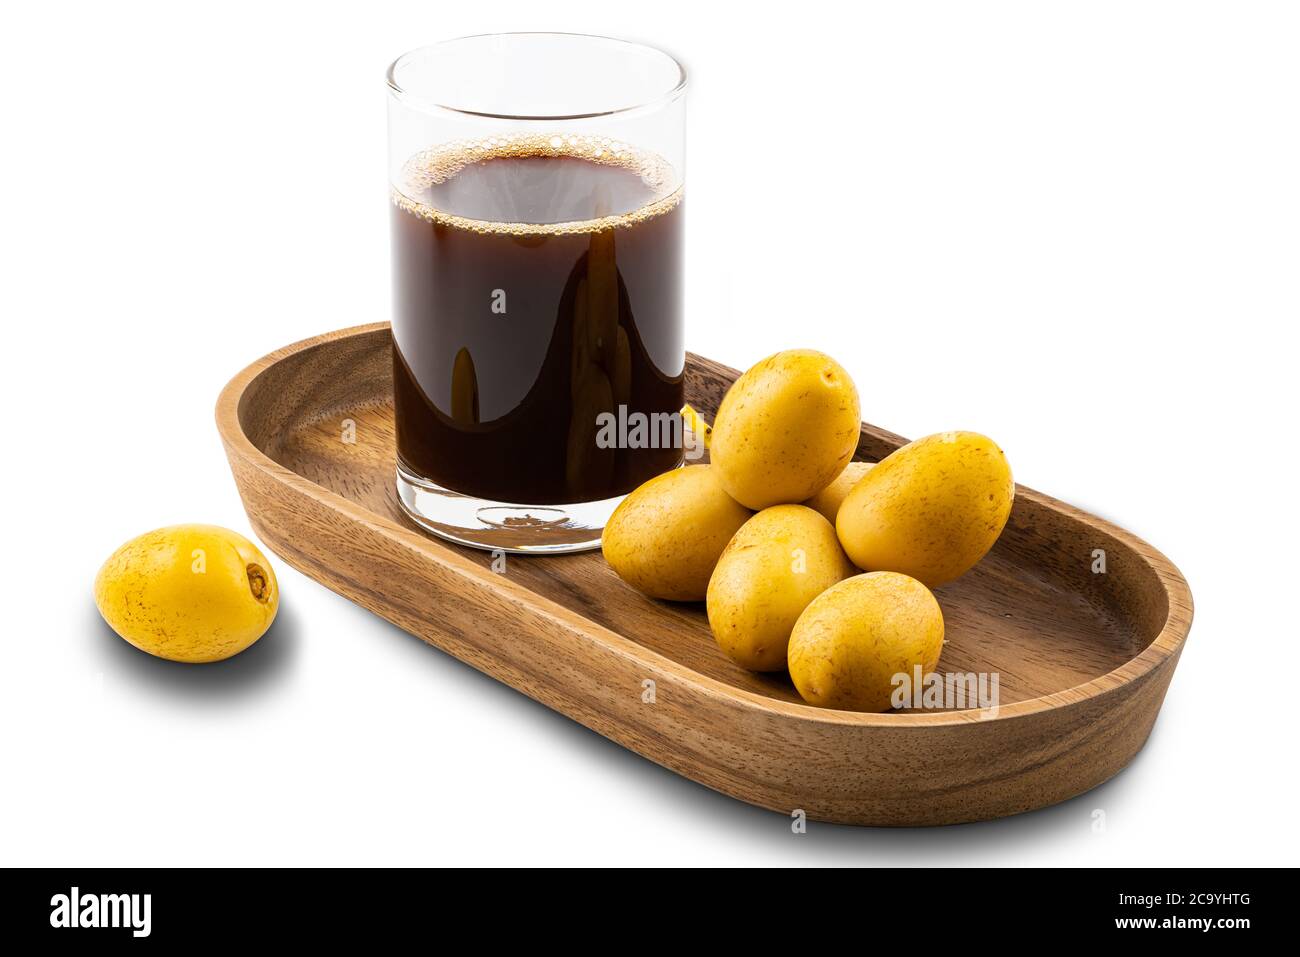 Homemade date juice in a glass and a bunch of fresh ripe date in a wooden tray on white background with clipping path. Stock Photo